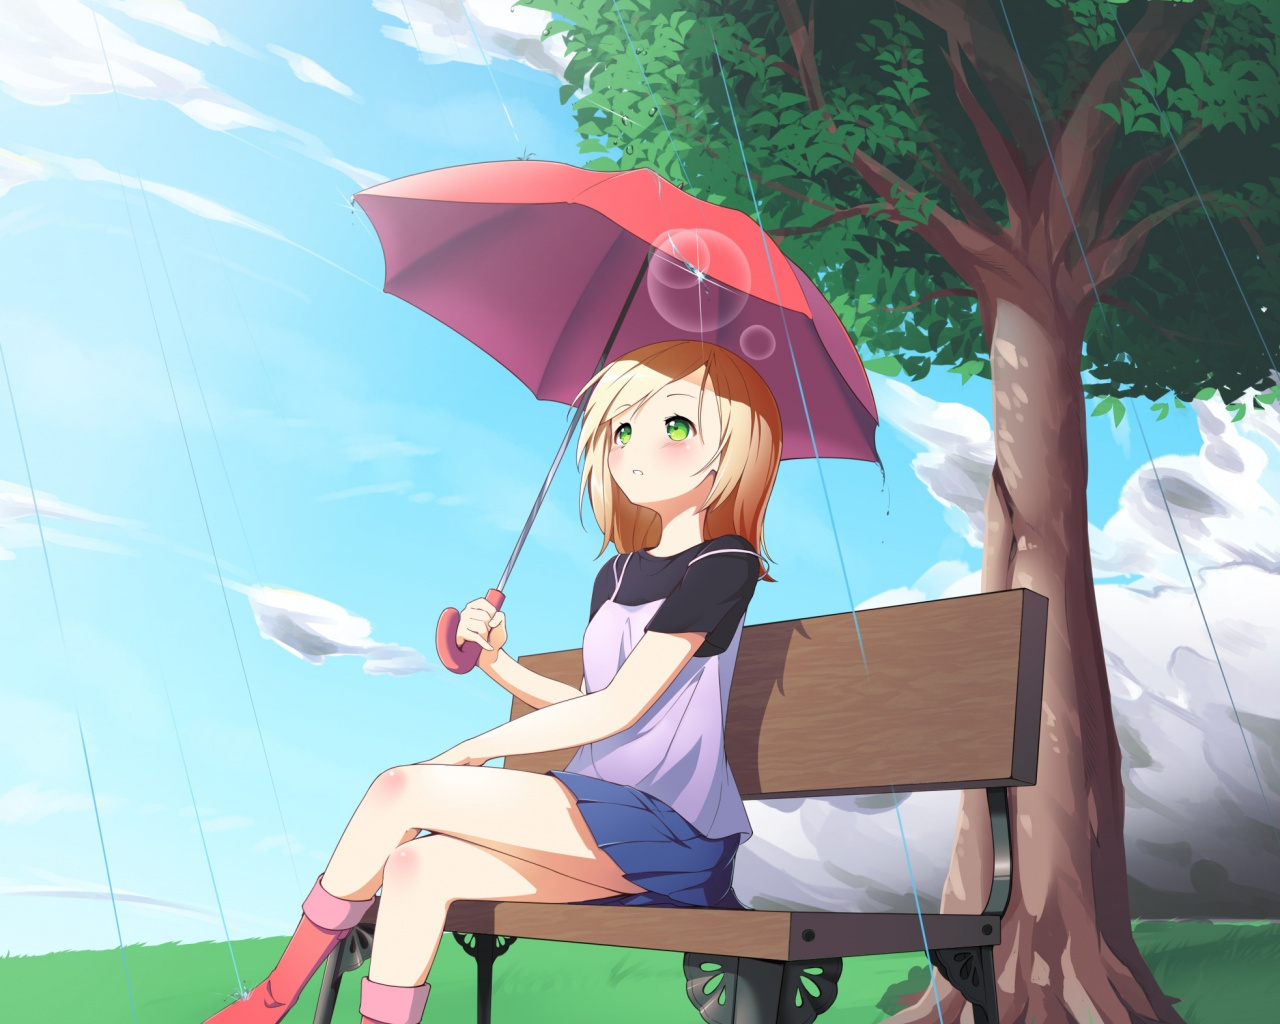 Anime Girl In A Sunny Day - HD Wallpaper 